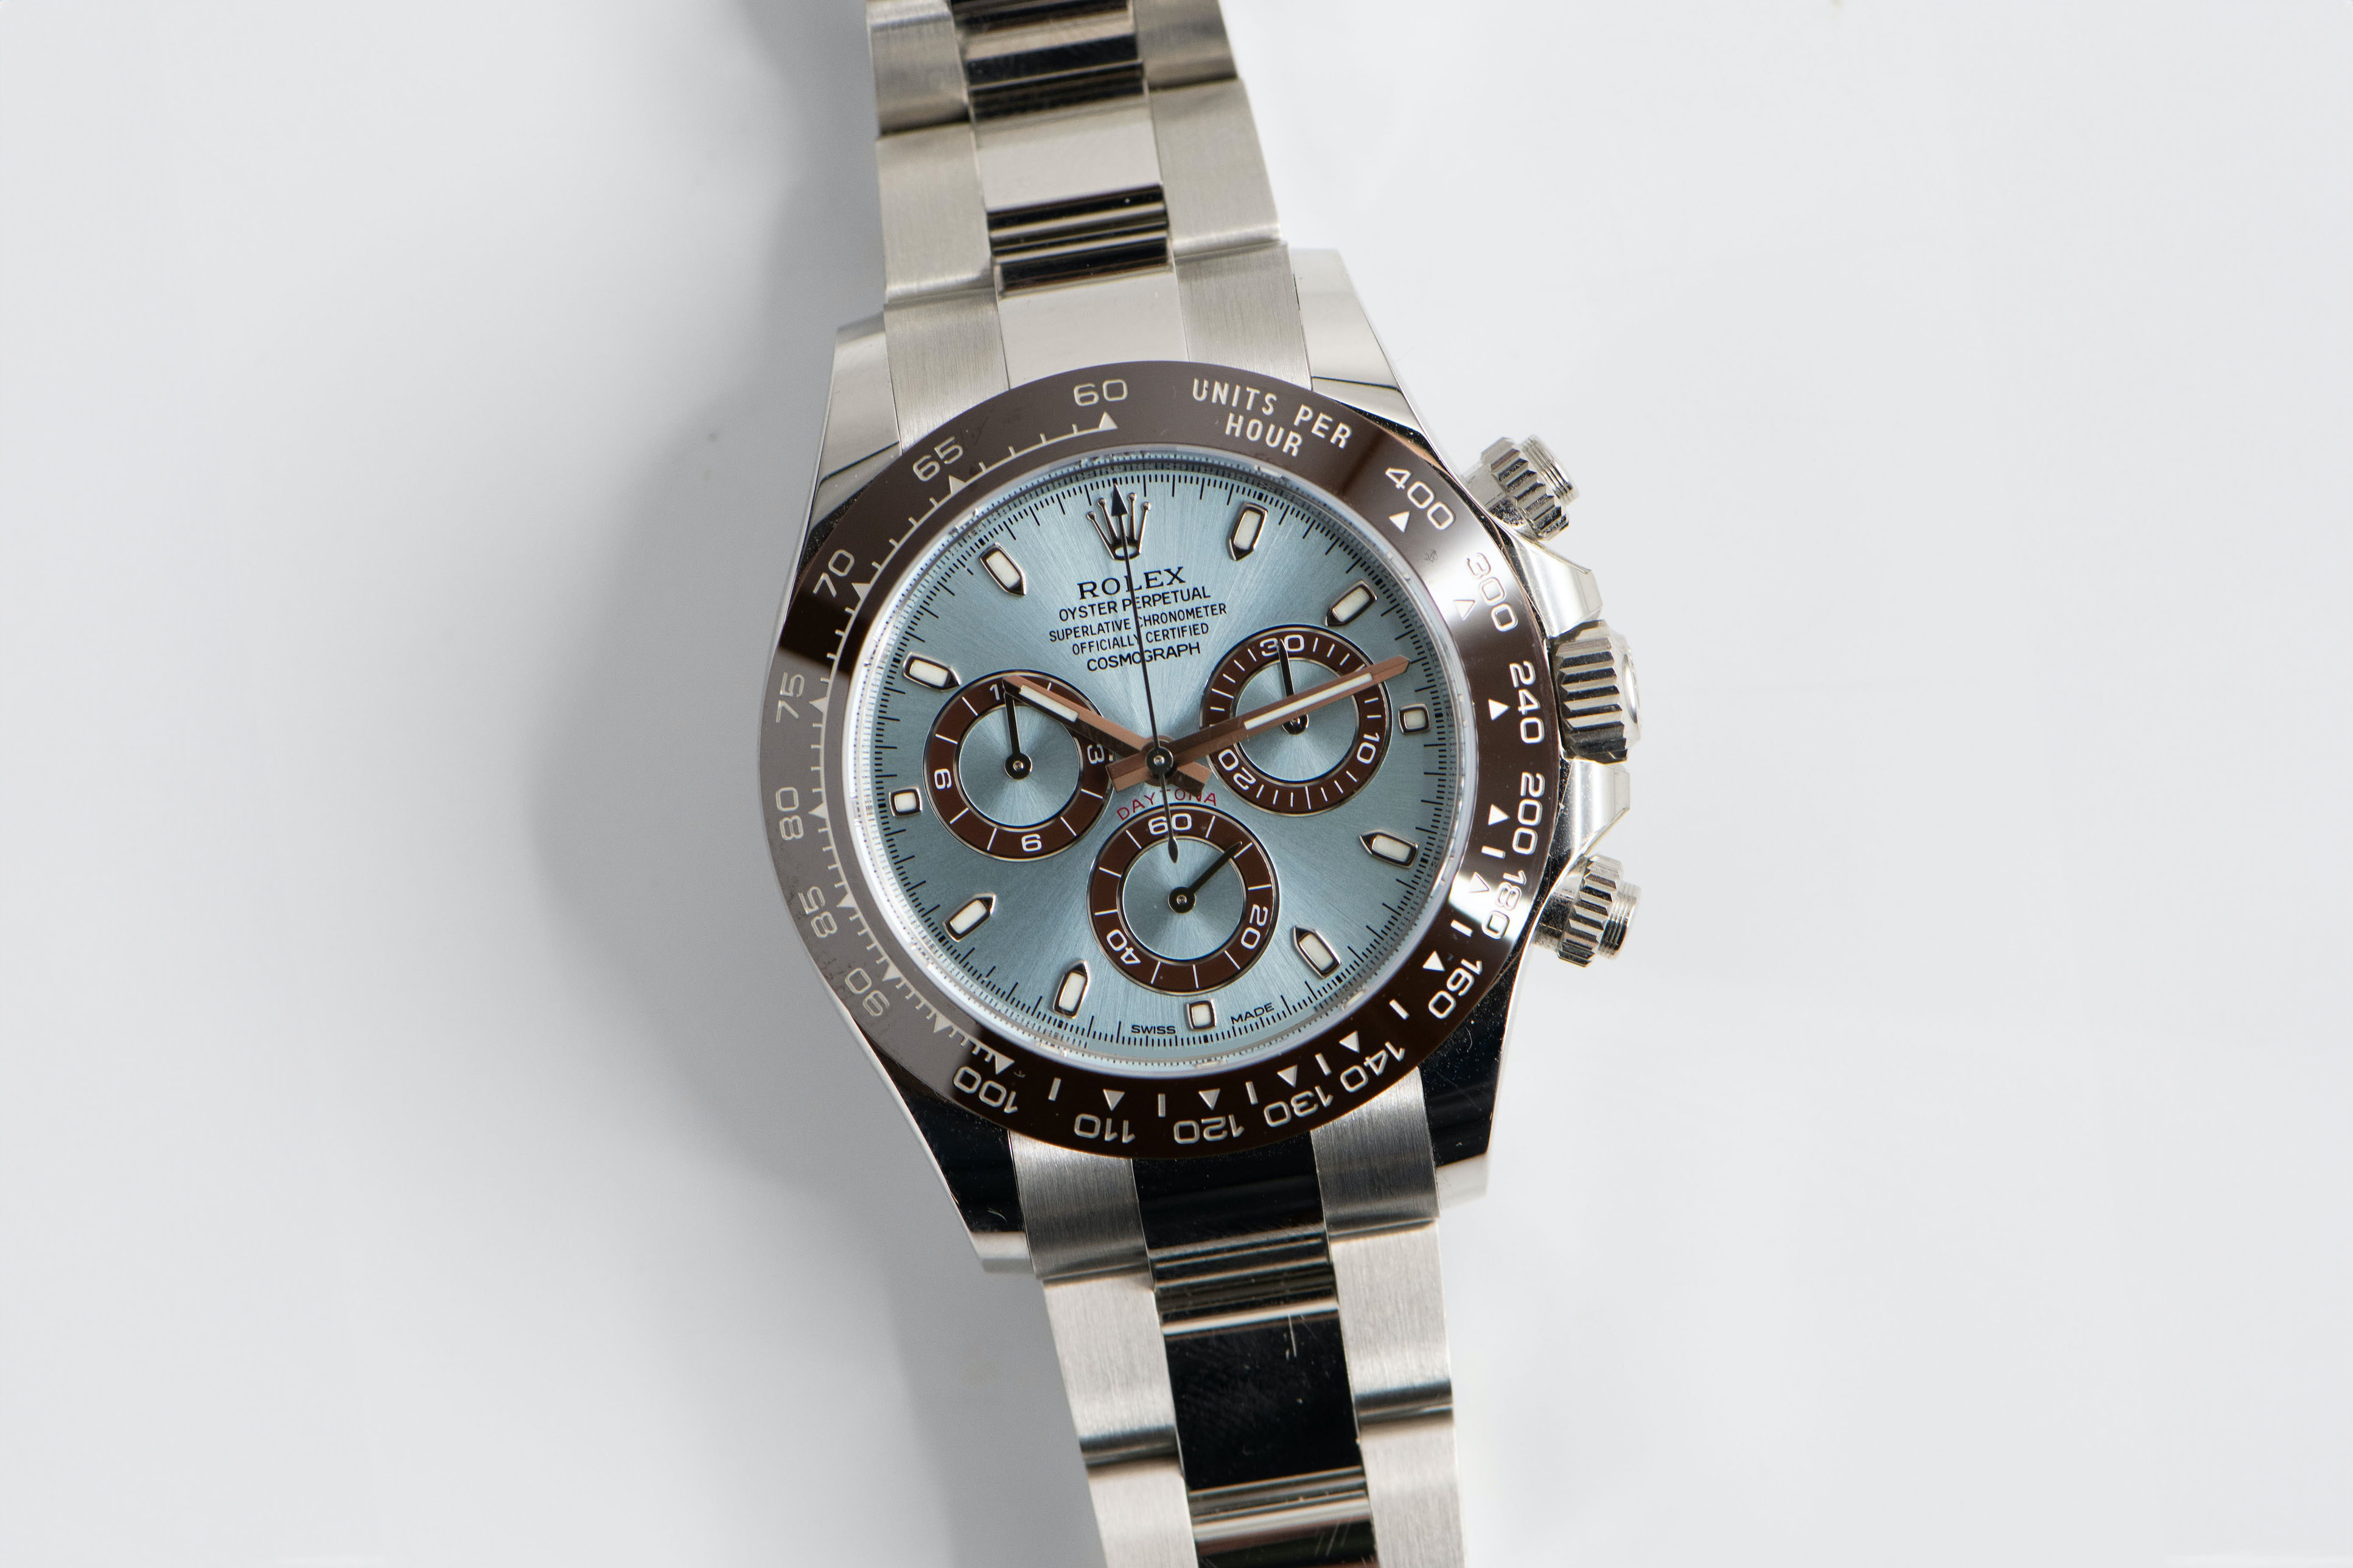 Launched in 2013 to mark the 50th anniversary of the Cosmograph, the ref. 116506 is the first series-production Daytona to be offered in platinum. 1